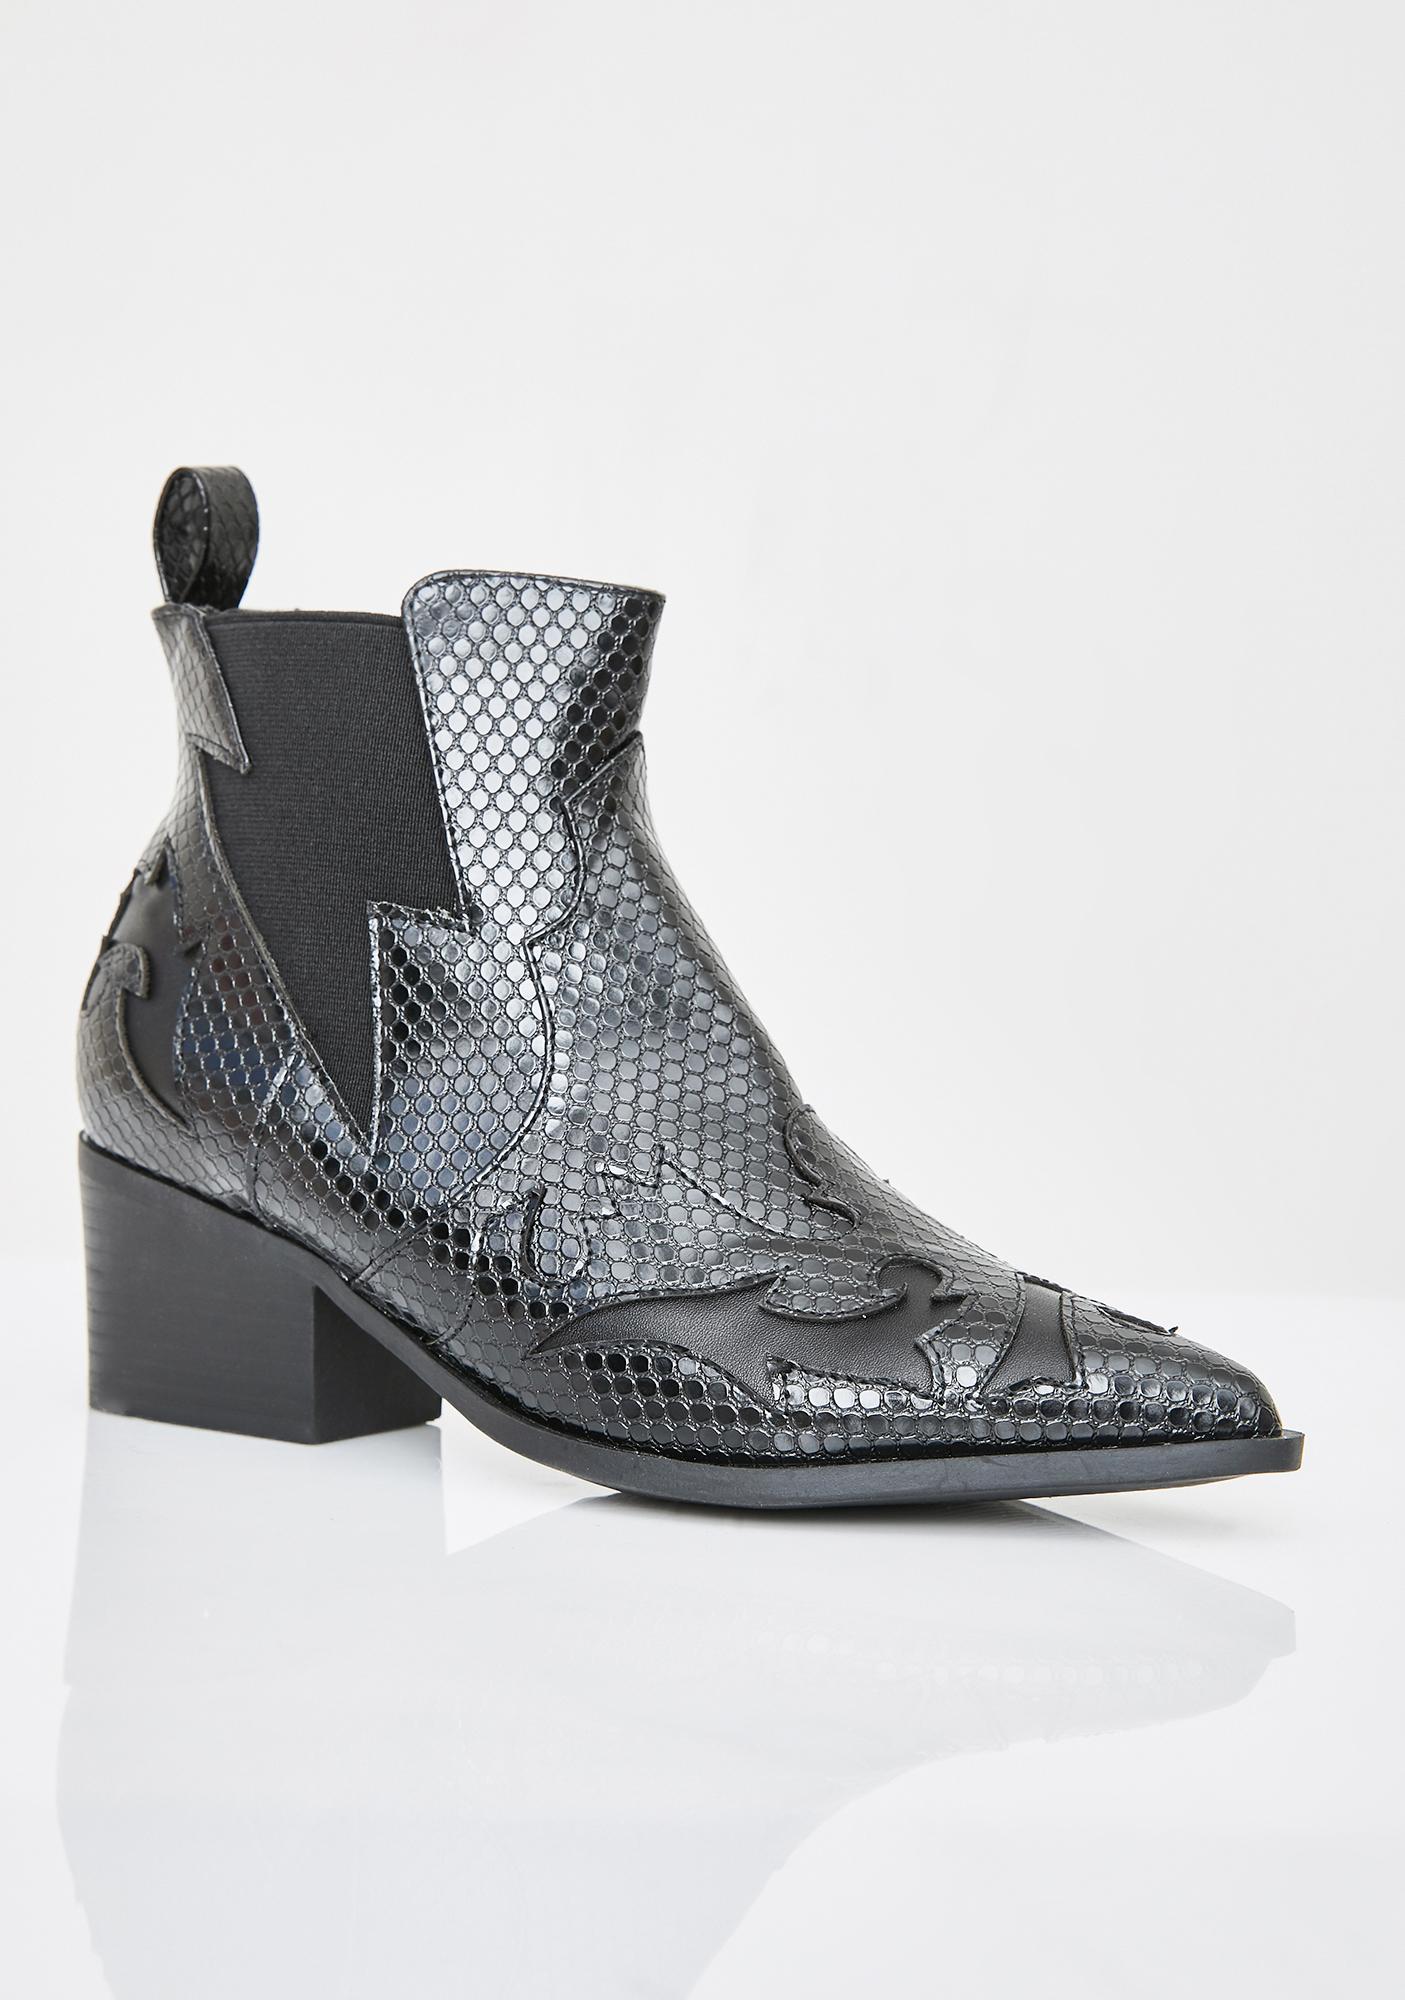 Snakeskin Ankle Pointed Toe Boots Black | Dolls Kill